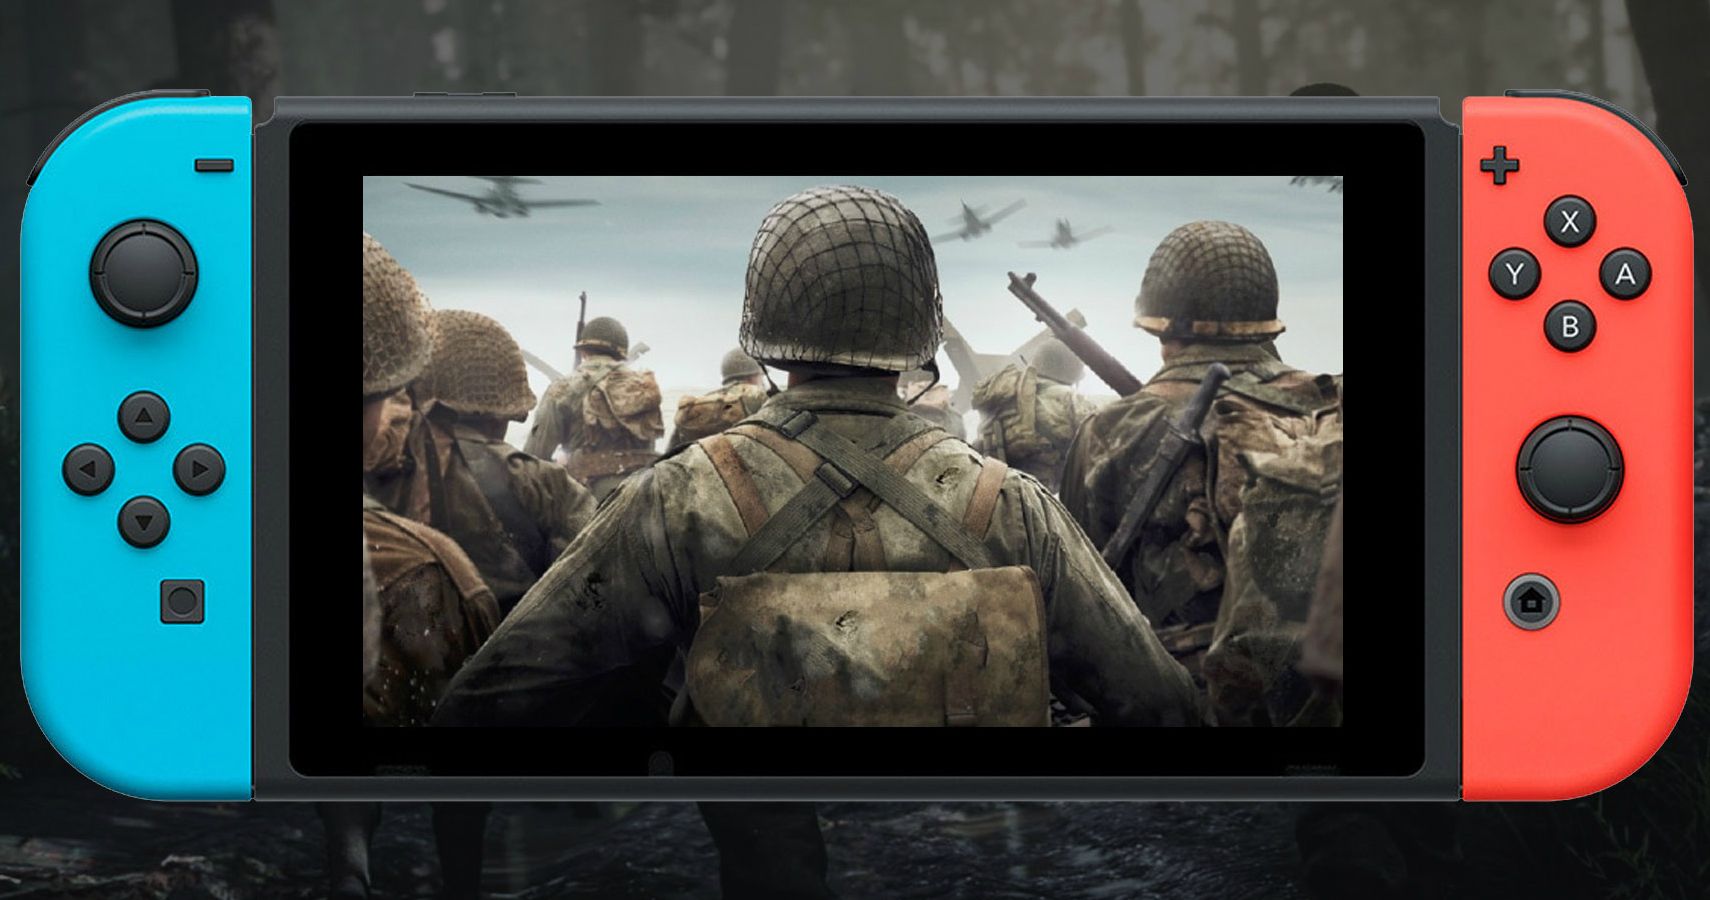 will call of duty ever come to switch